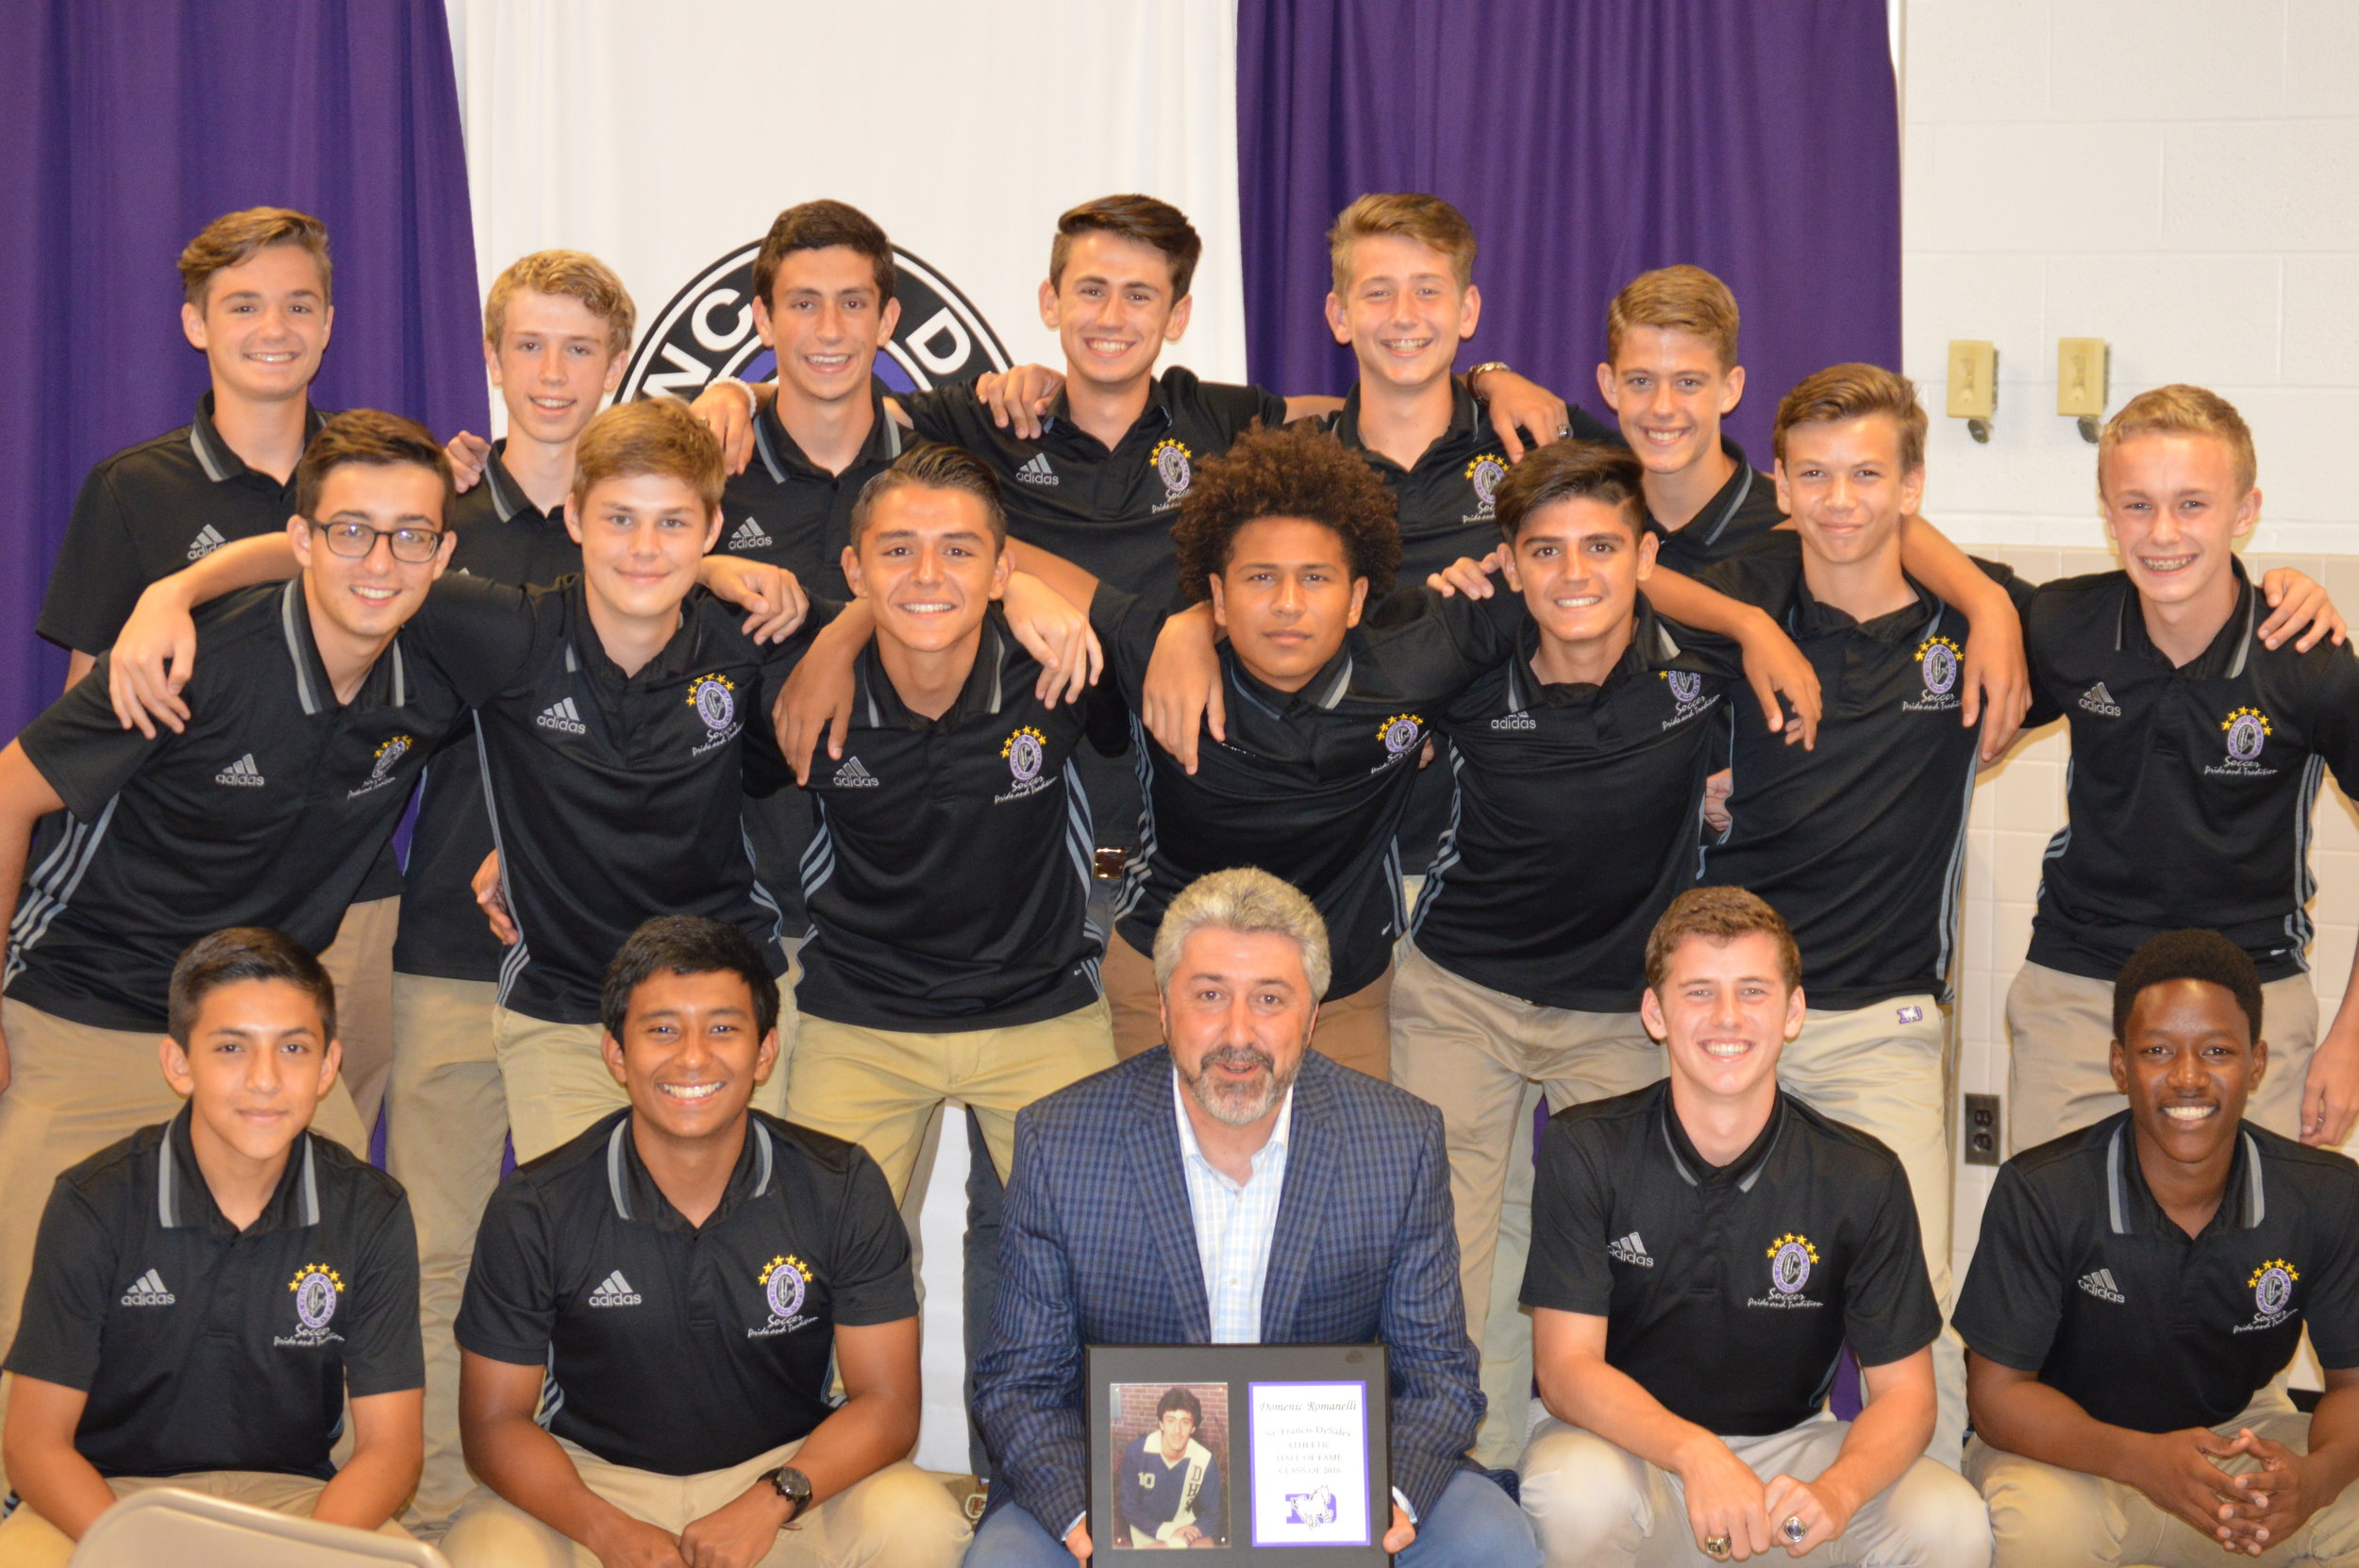 Coach Romanelli with his 2016 Boys Soccer team